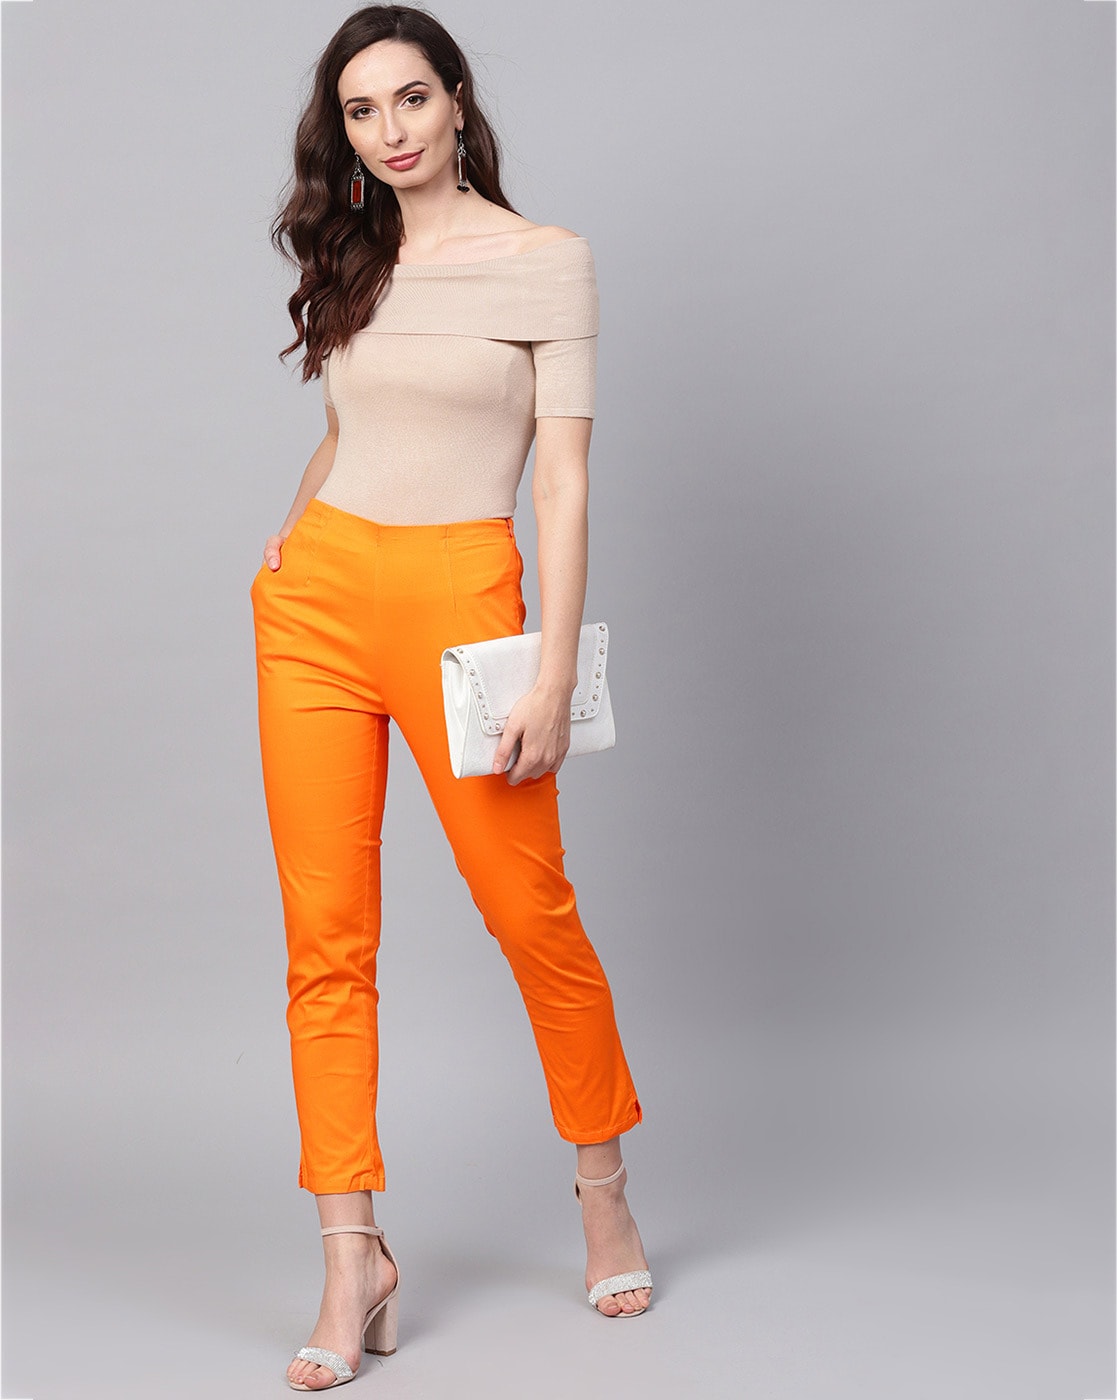 BAESD Women Pencil Slim Fit Mid-Rise Cigarette Trousers Price in India,  Full Specifications & Offers | DTashion.com